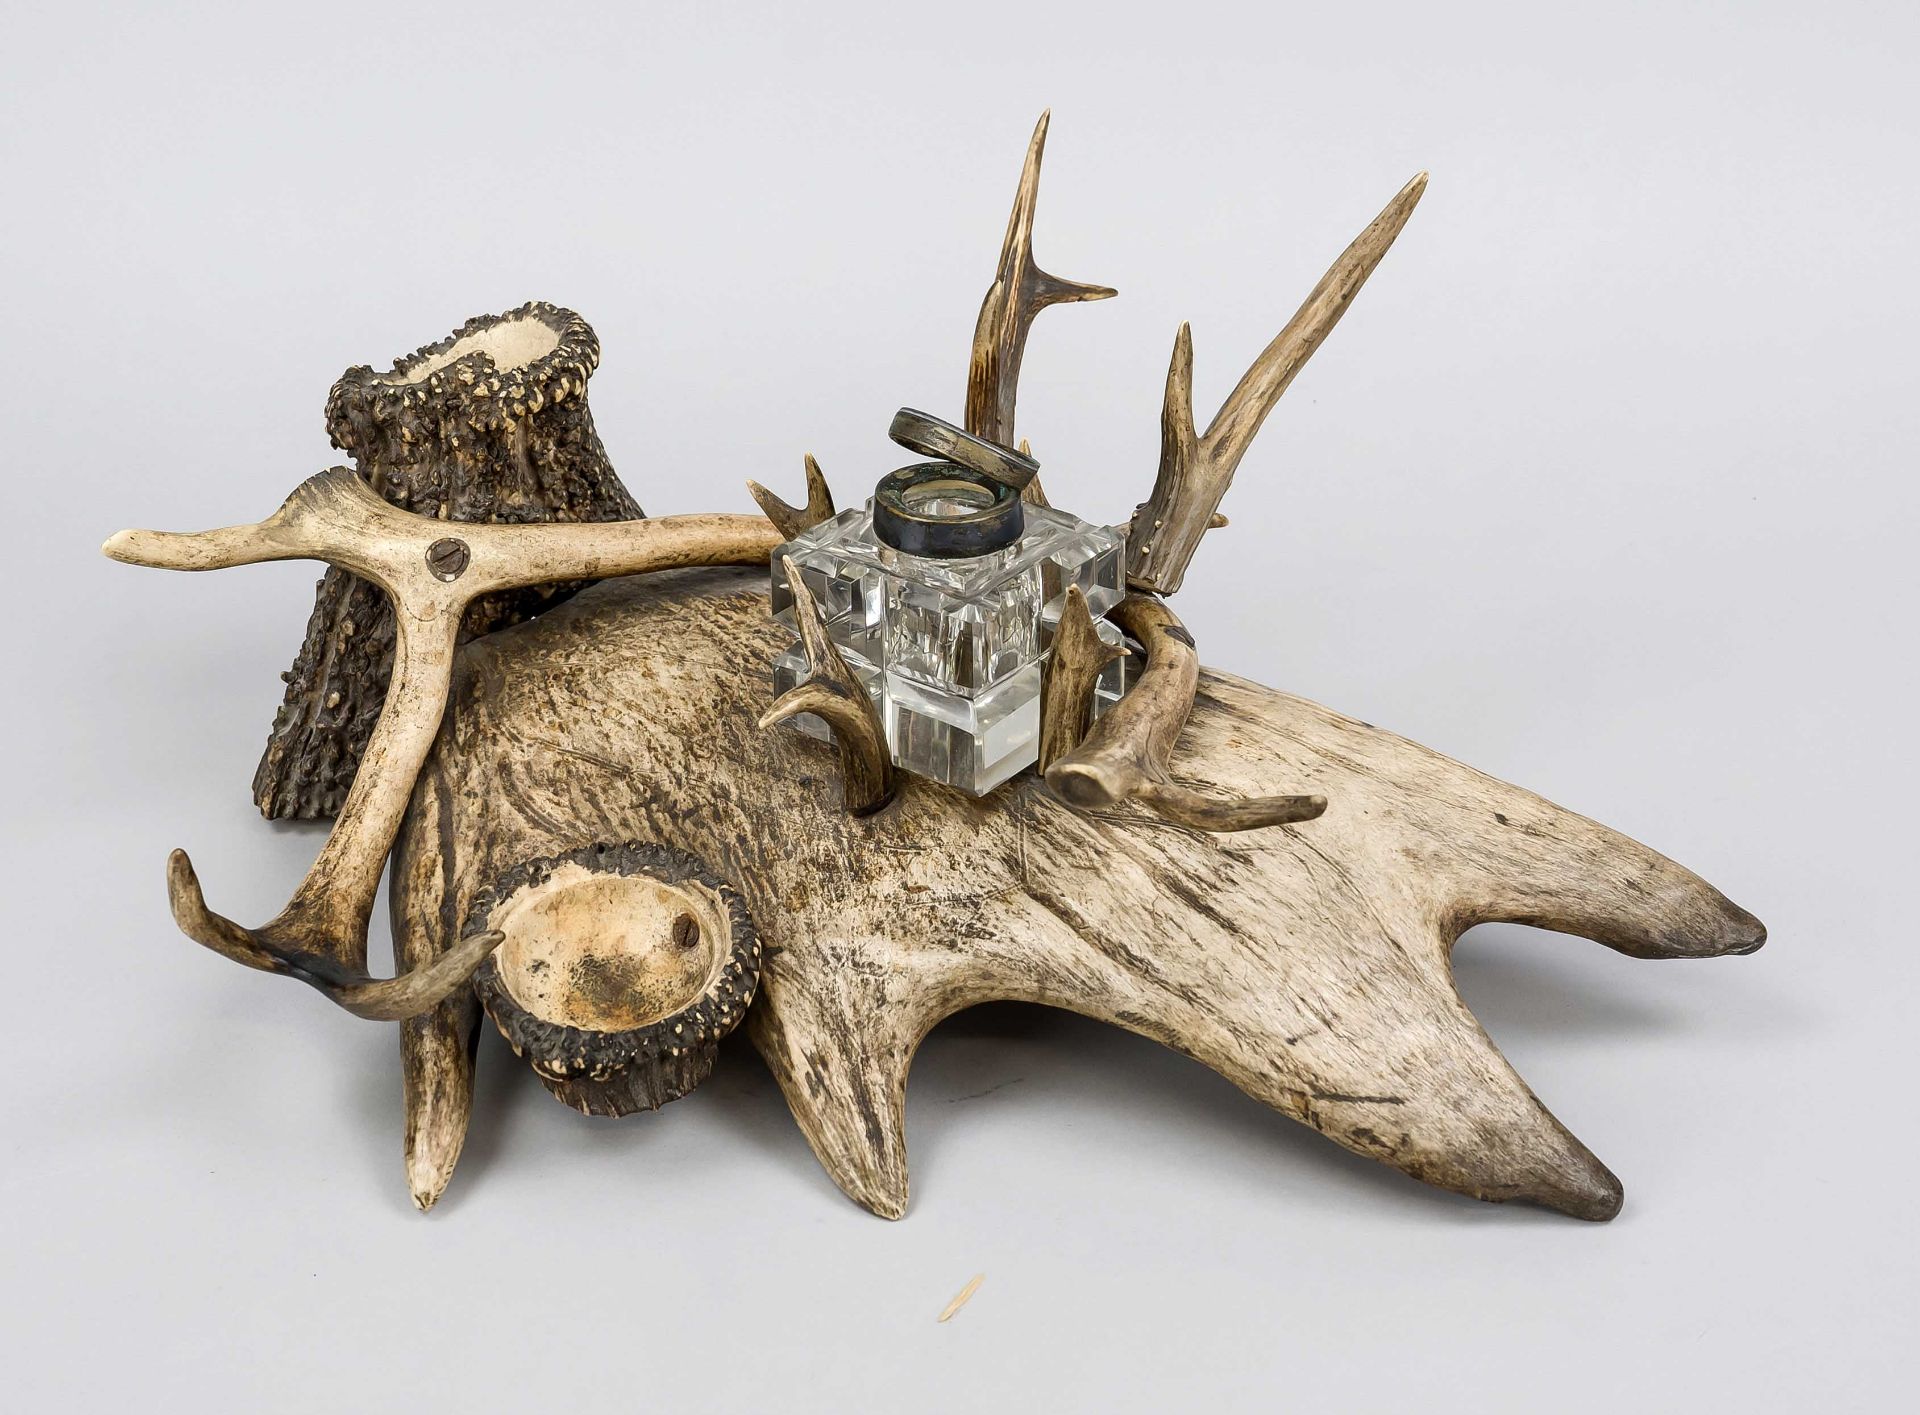 Writing utensil made of stag horn, c. 1900, mounted from antler poles, a cut glass inkwell in the